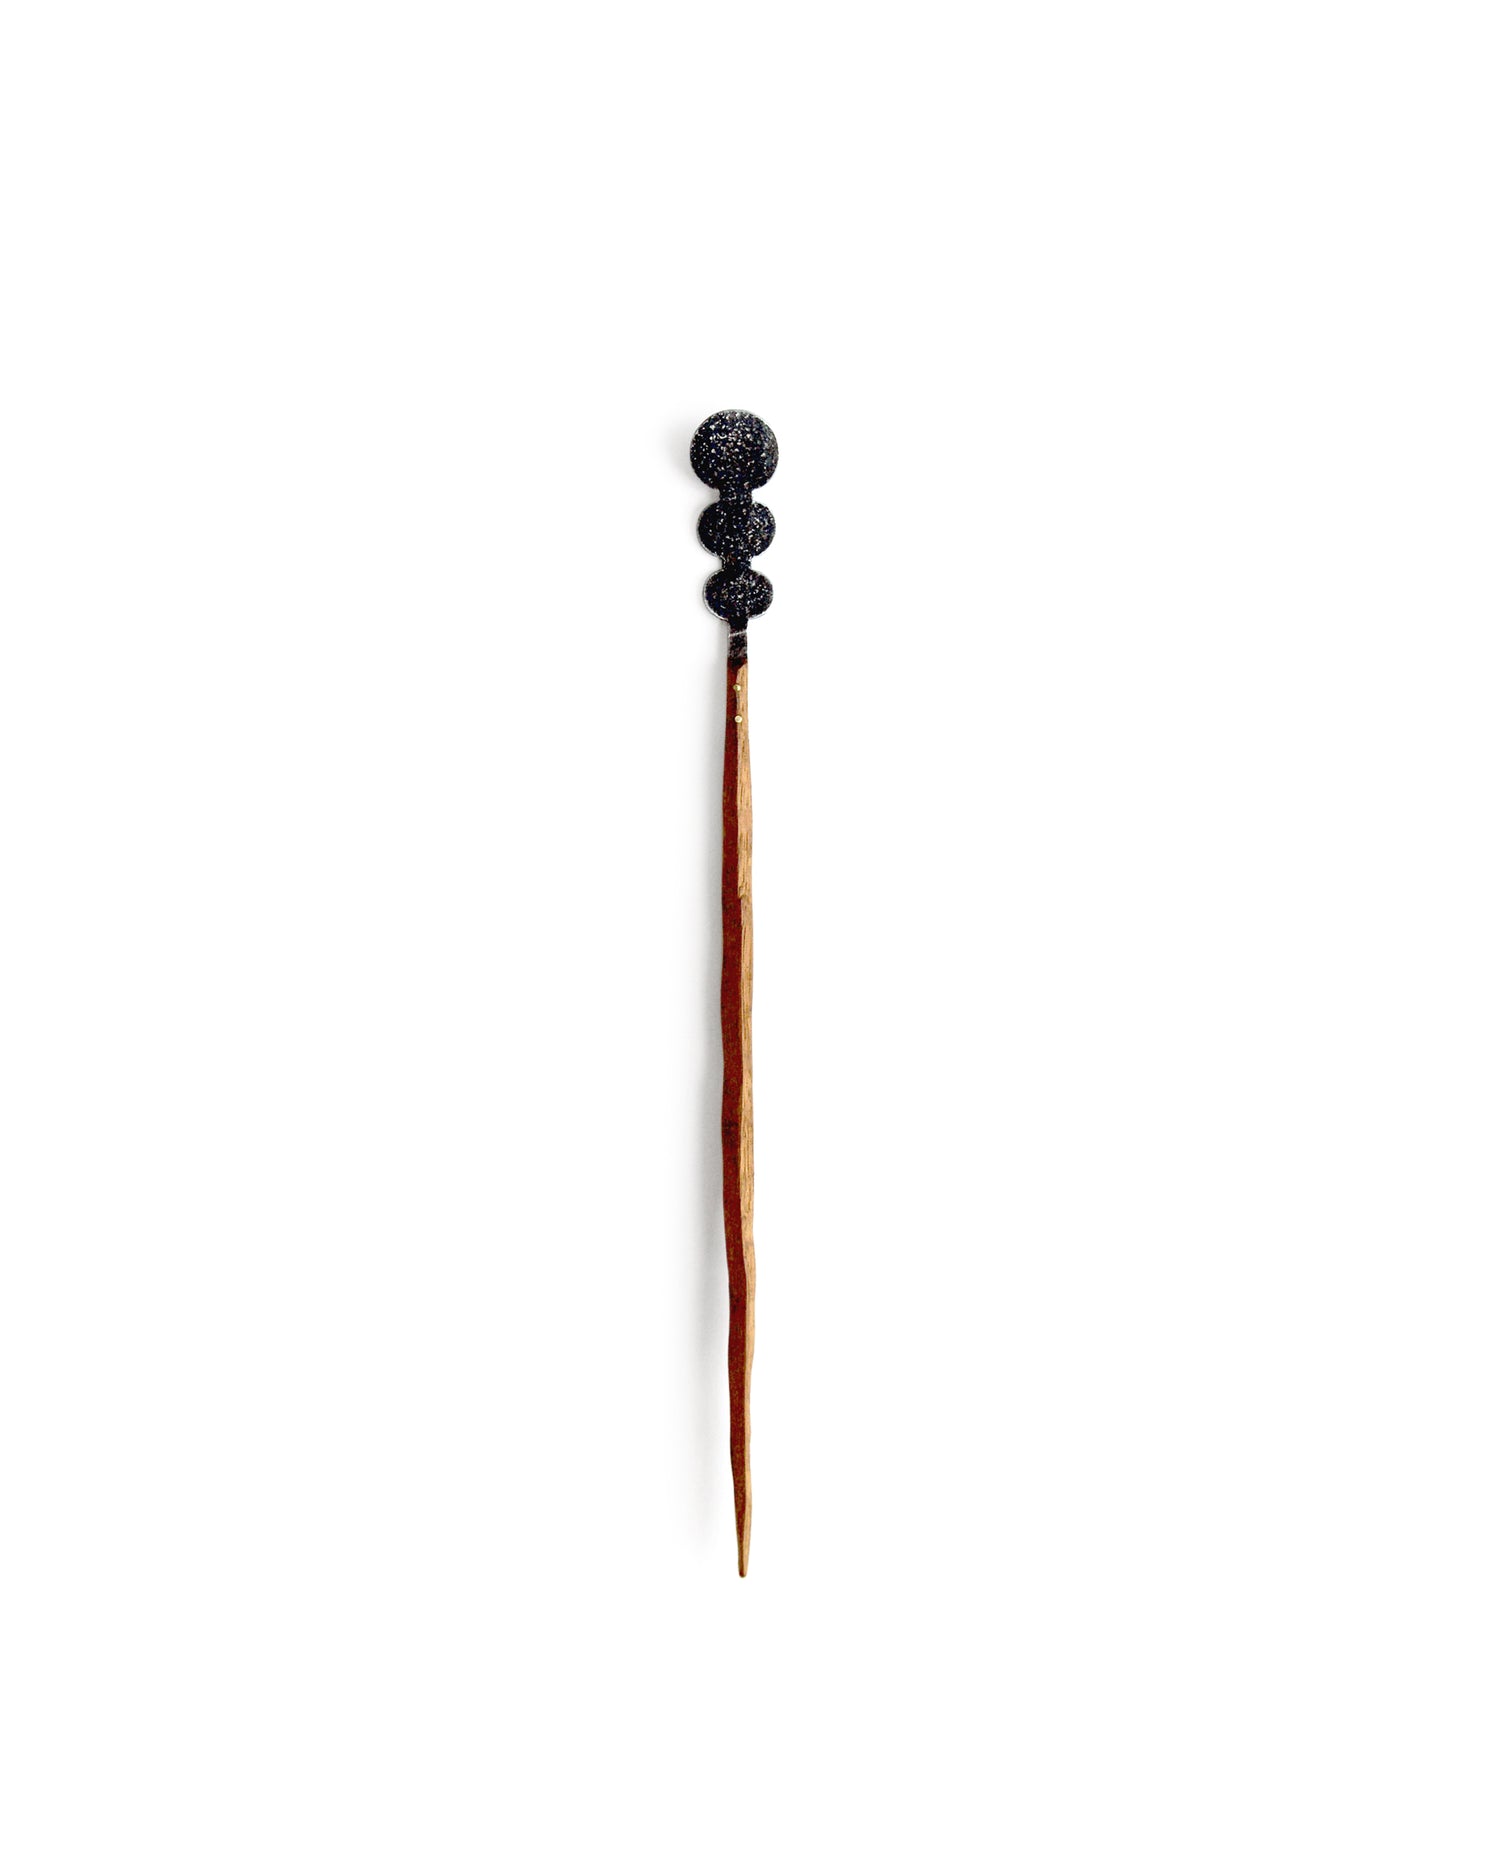 Mahogany Sprout Chashaku Tea Ladle - Bubble (OUT OF STOCK)